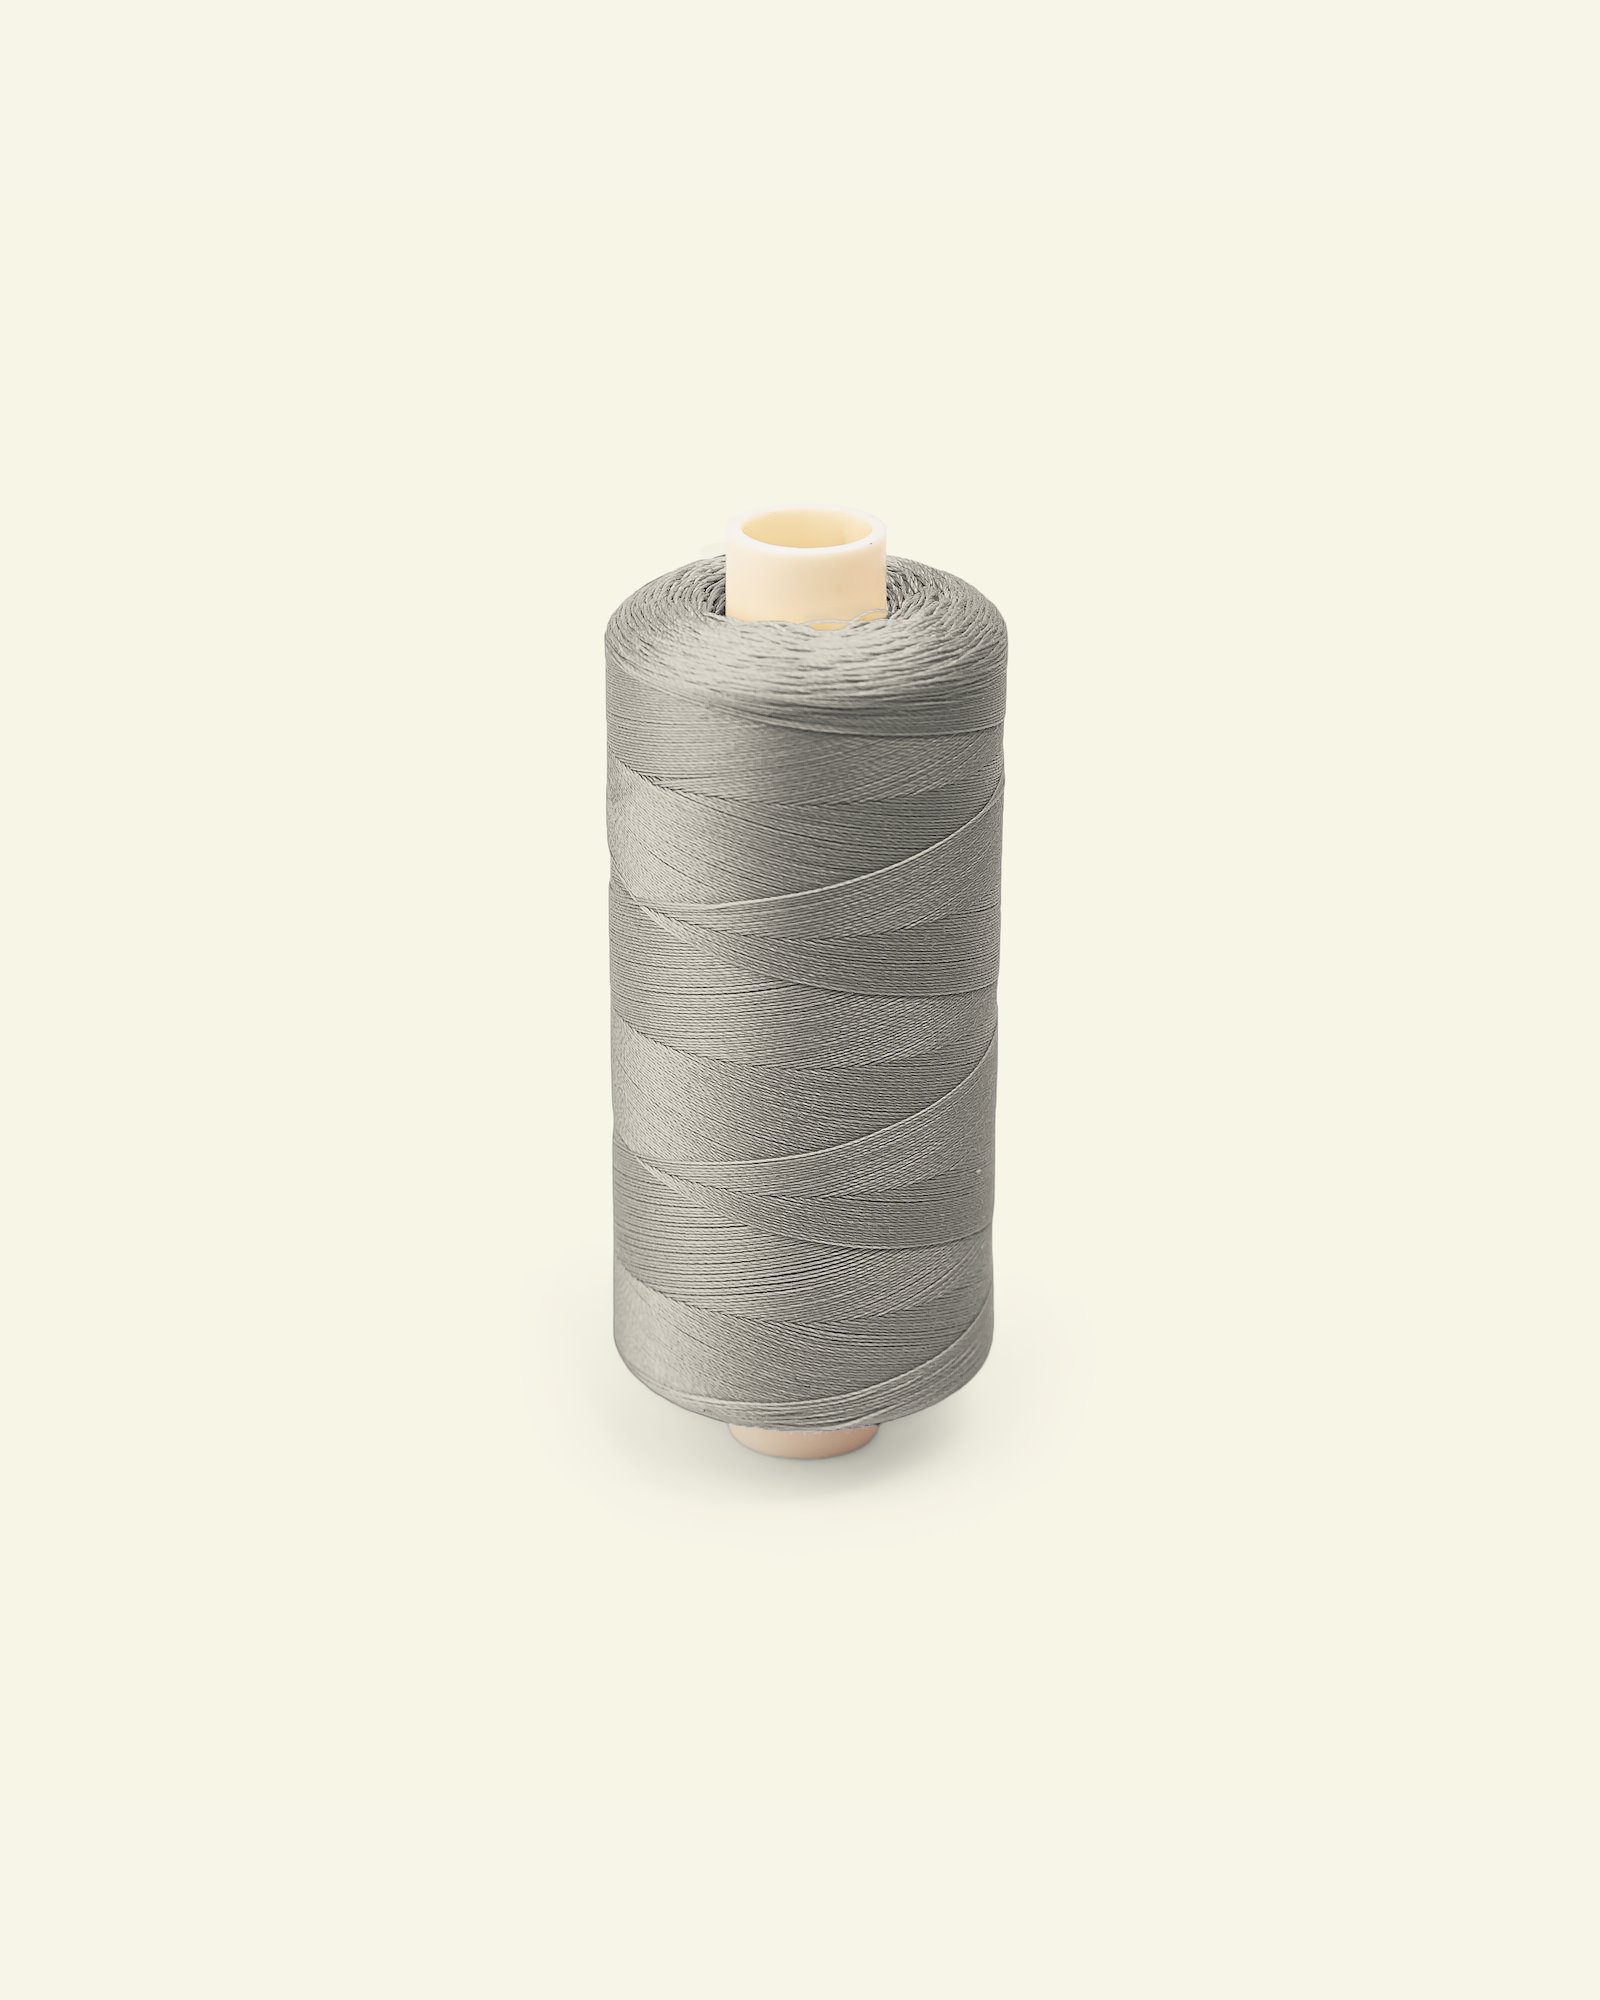 Sewing thread cotton light grey 1000m 14040_pack